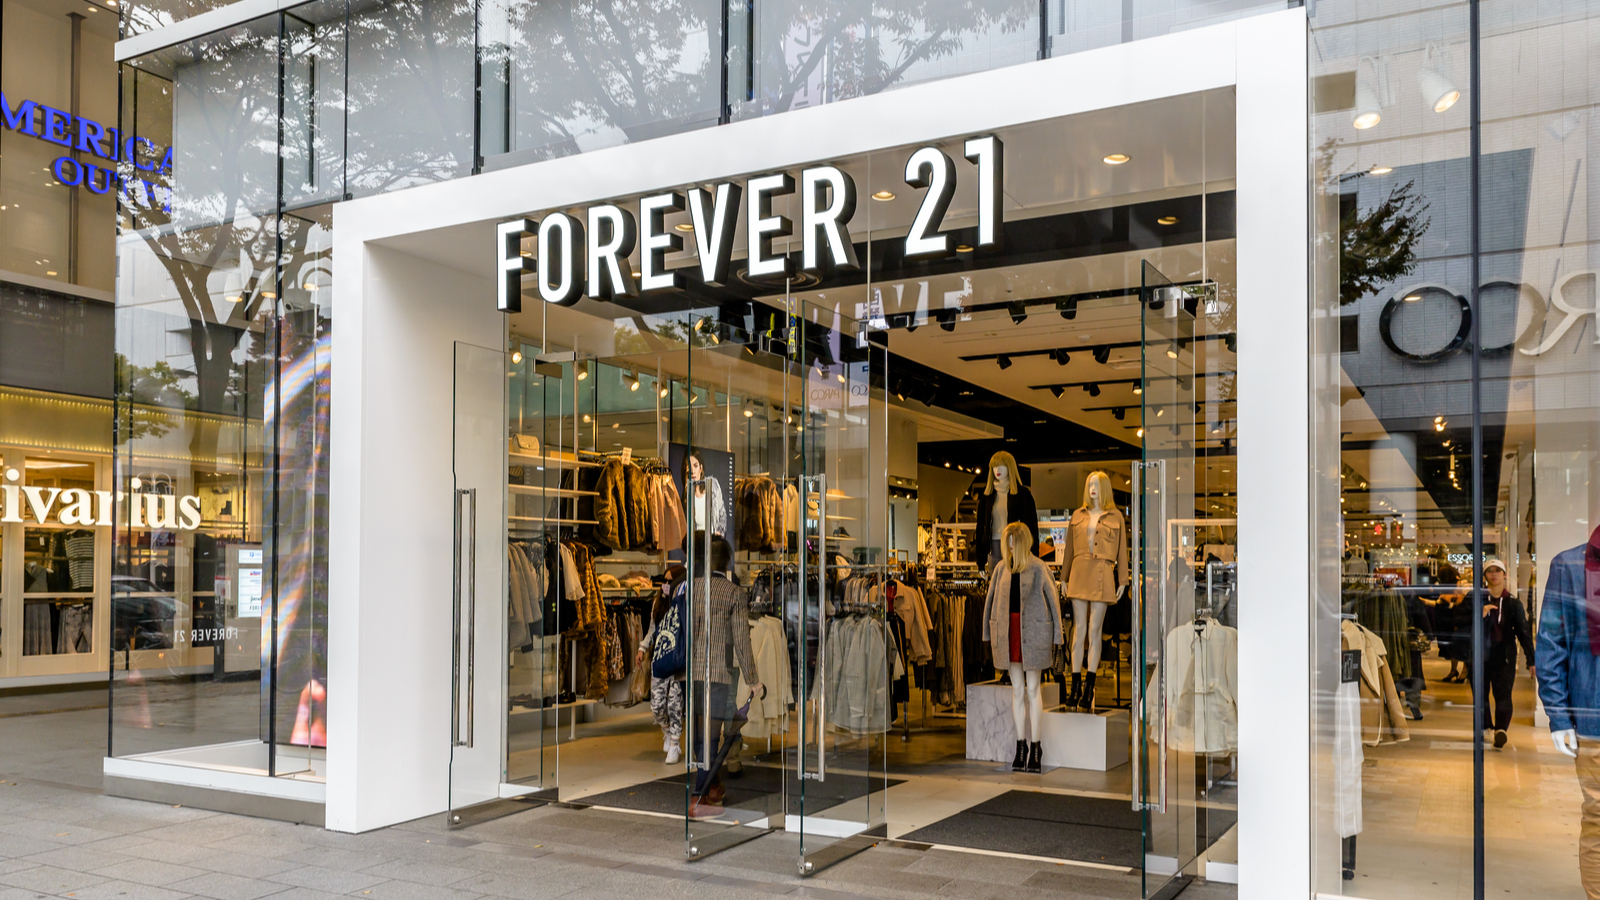 What Forever 21's bankruptcy & store closings means for KC retail